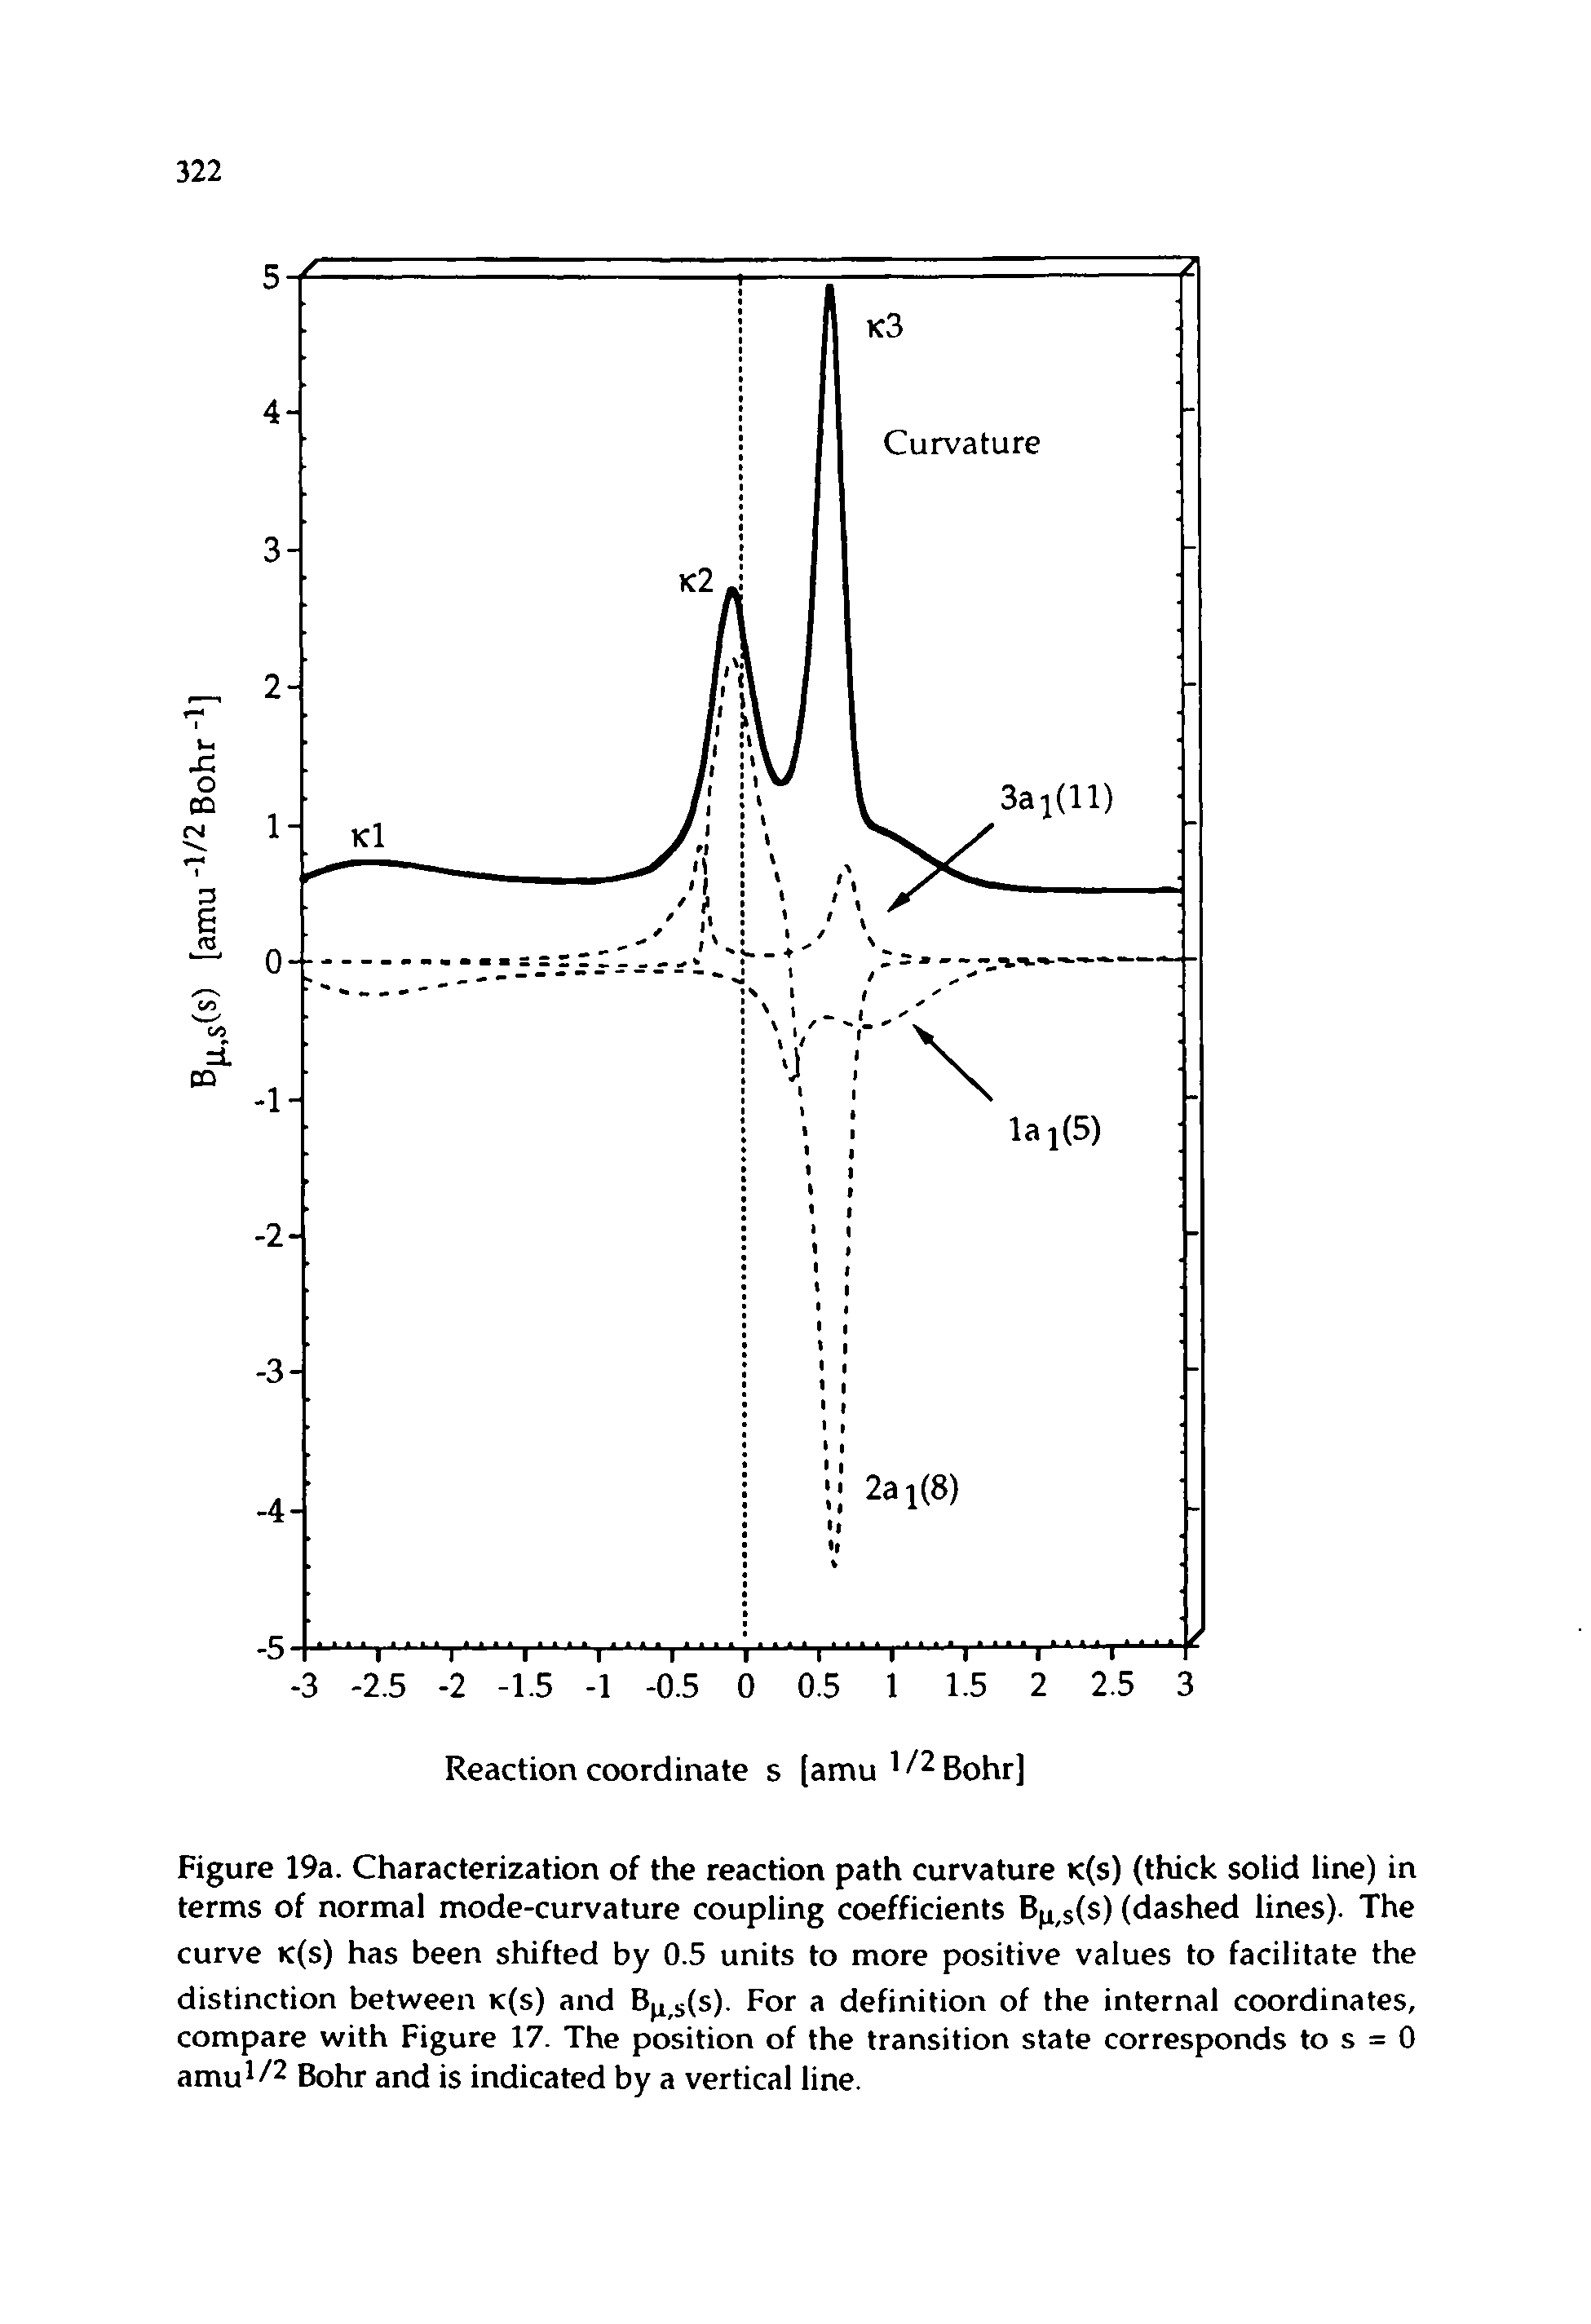 Figure 19a. Characterization of the reaction path curvature k(s) (thick solid line) in terms of normal mode-curvature coupling coefficients Bn,s(s) (dashed lines). The curve k(s) has been shifted by 0.5 units to more positive values to facilitate the distinction between k(s) and Bji s(s). For a definition of the internal coordinates, compare with Figure 17. The position of the transition state corresponds to s = 0 amu /2 Bohr and is indicated by a vertical line.